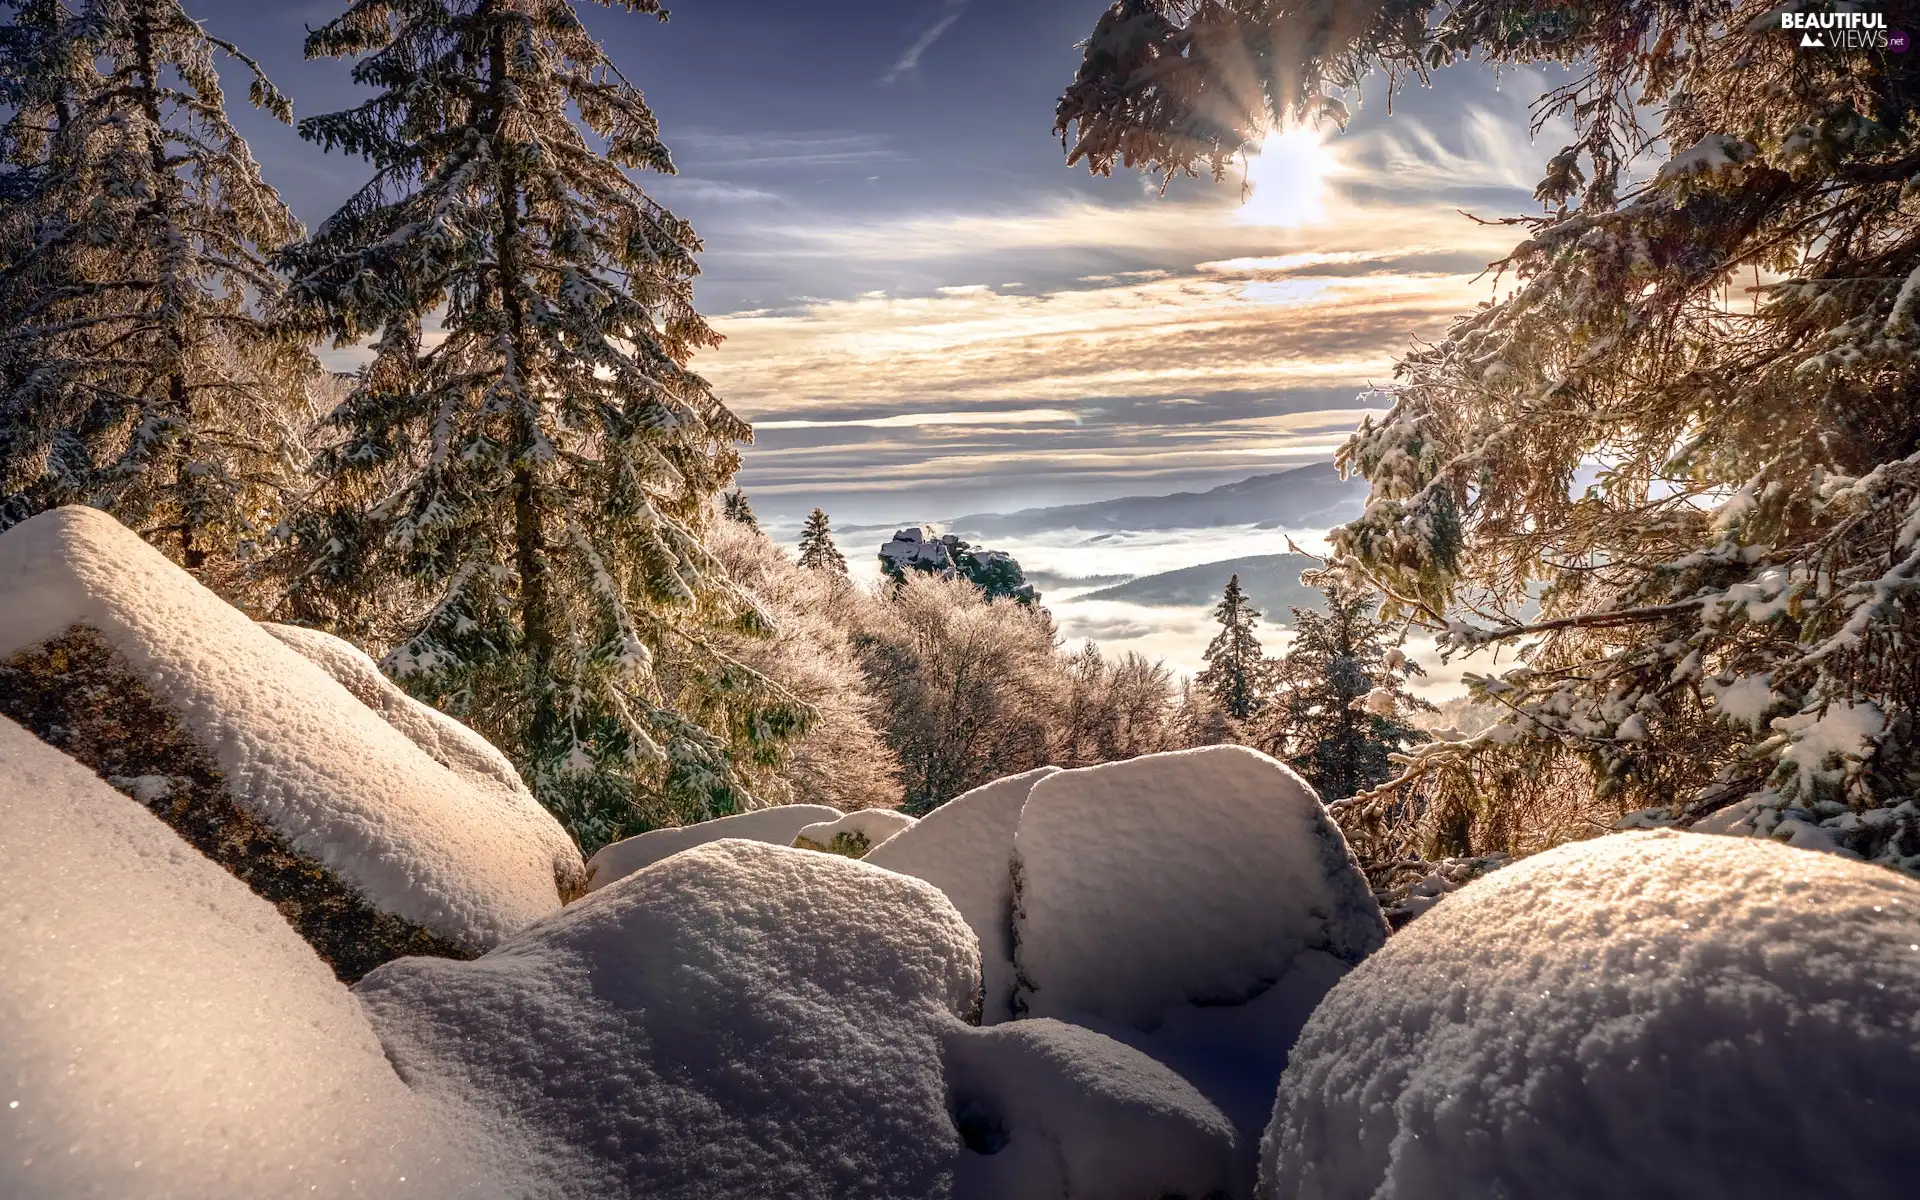 Stones, winter, trees, viewes, Snowy, Sunrise